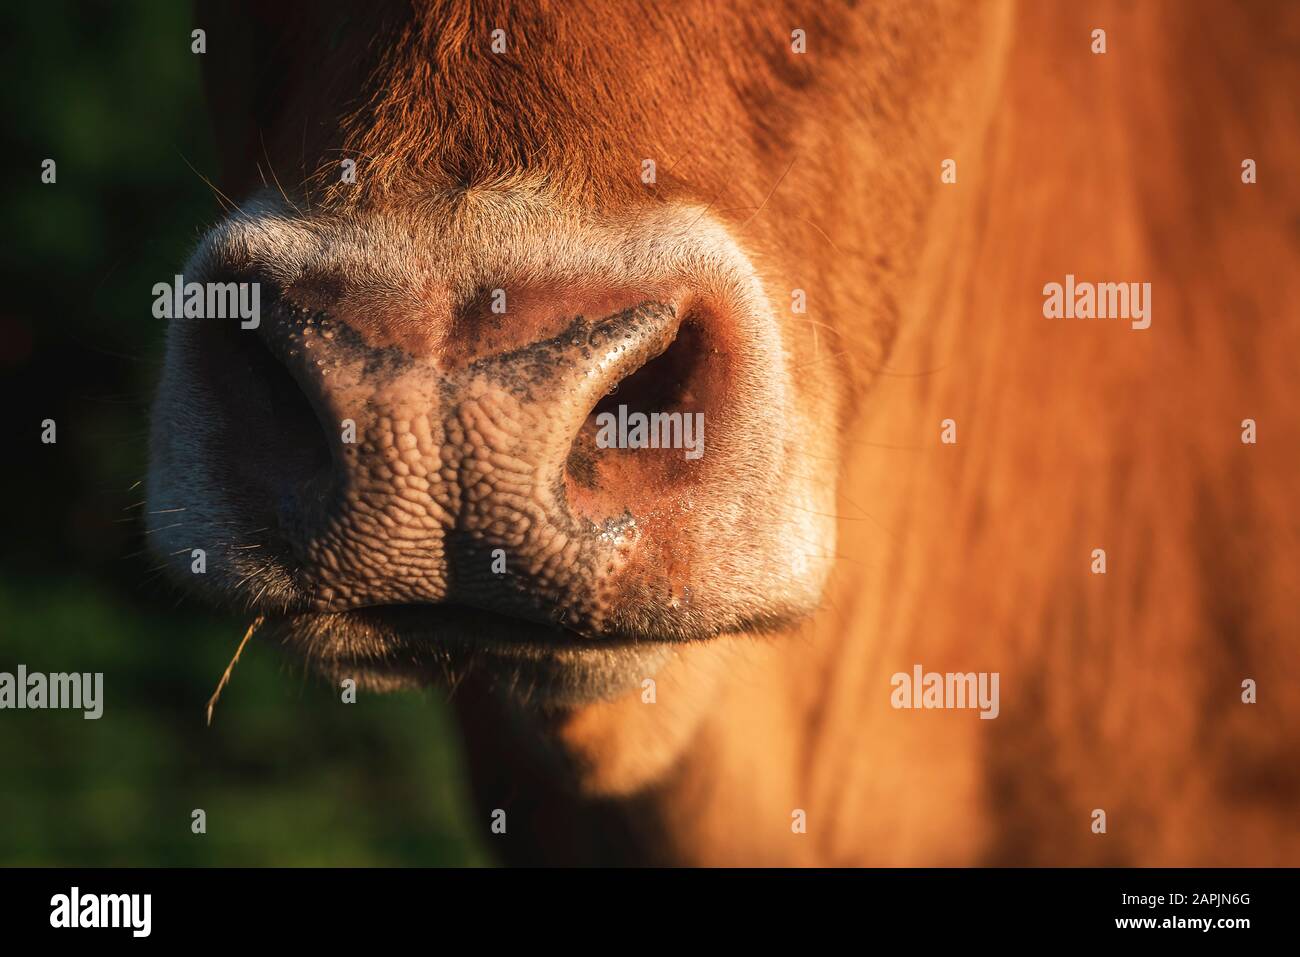 Cow nose close-up, in bright sunlight. Macro image of a cow snout. Red fur cow snout. Domestic animal nose. Brown ox nose close-up. Stock Photo